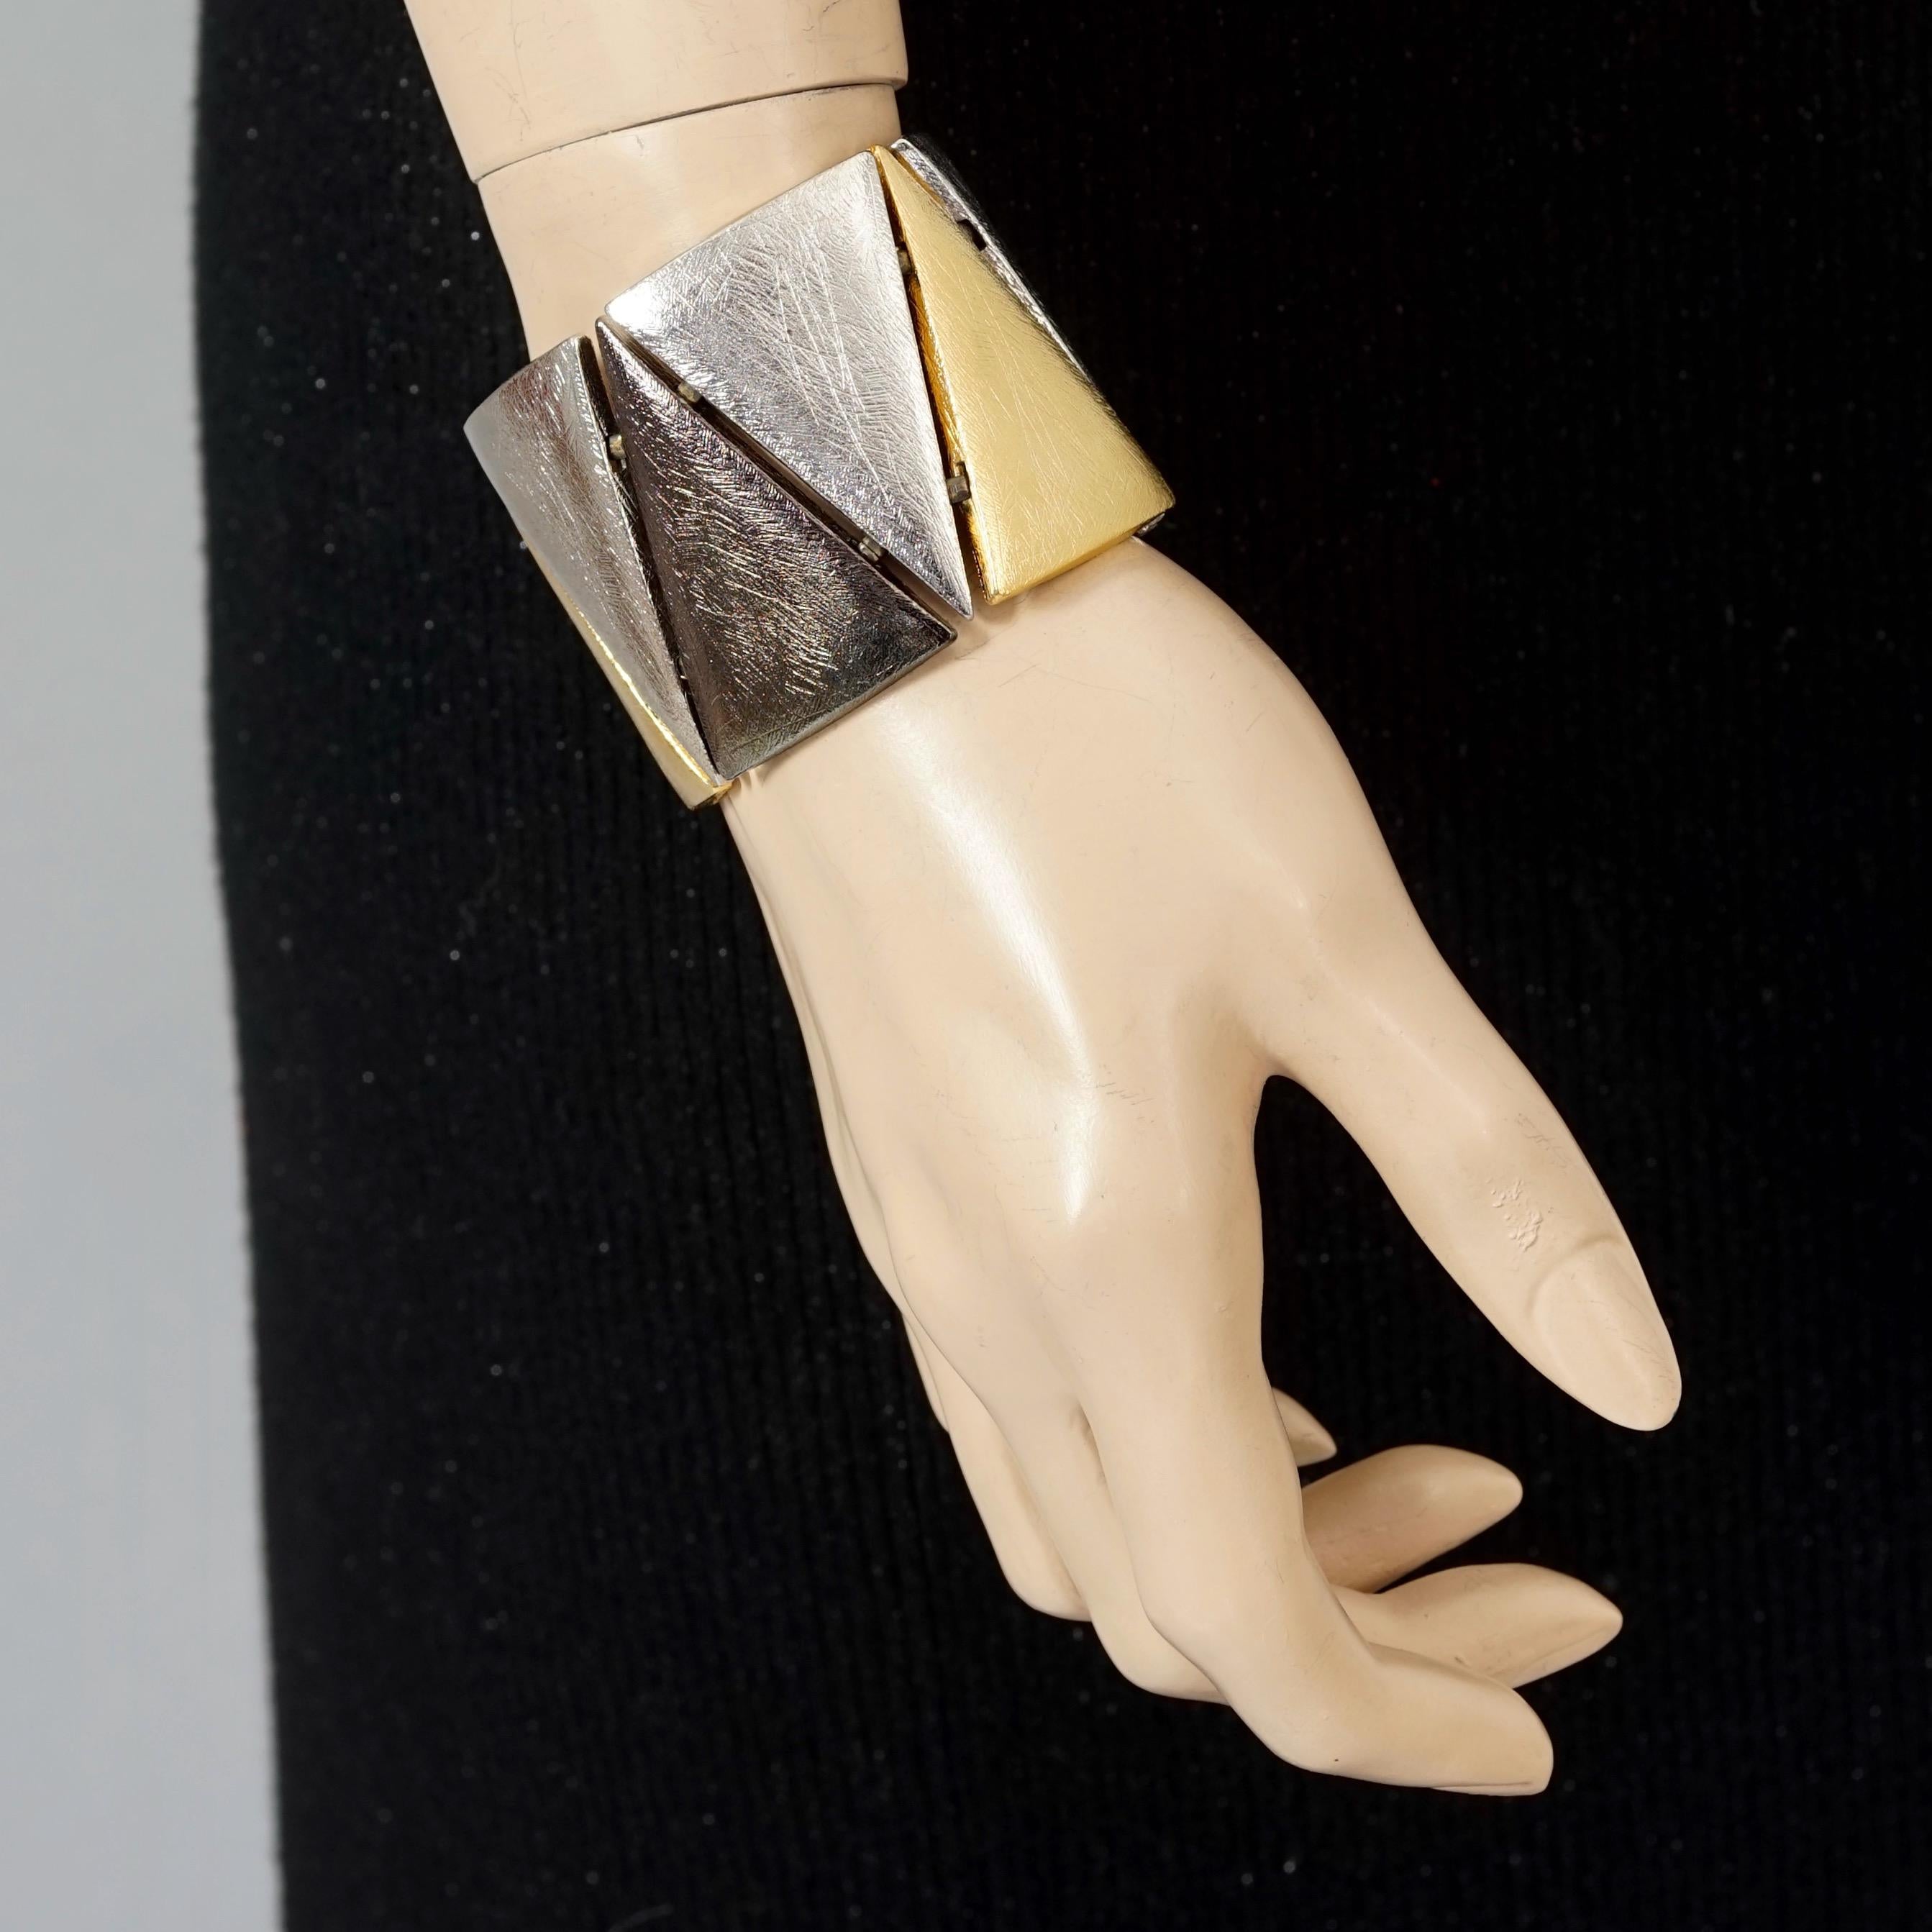 Vintage YVES SAINT LAURENT Ysl Triangle Link Tricolor Cuff Bracelet

Measurements:
Height: 1.96 inches (5 cm)
Wearable Length: 6.88 inches (17.5 cm)

Features:
- 100% Authentic YVES SAINT LAURENT.
- Triangle link cuff bracelet.
- Gold, silver and